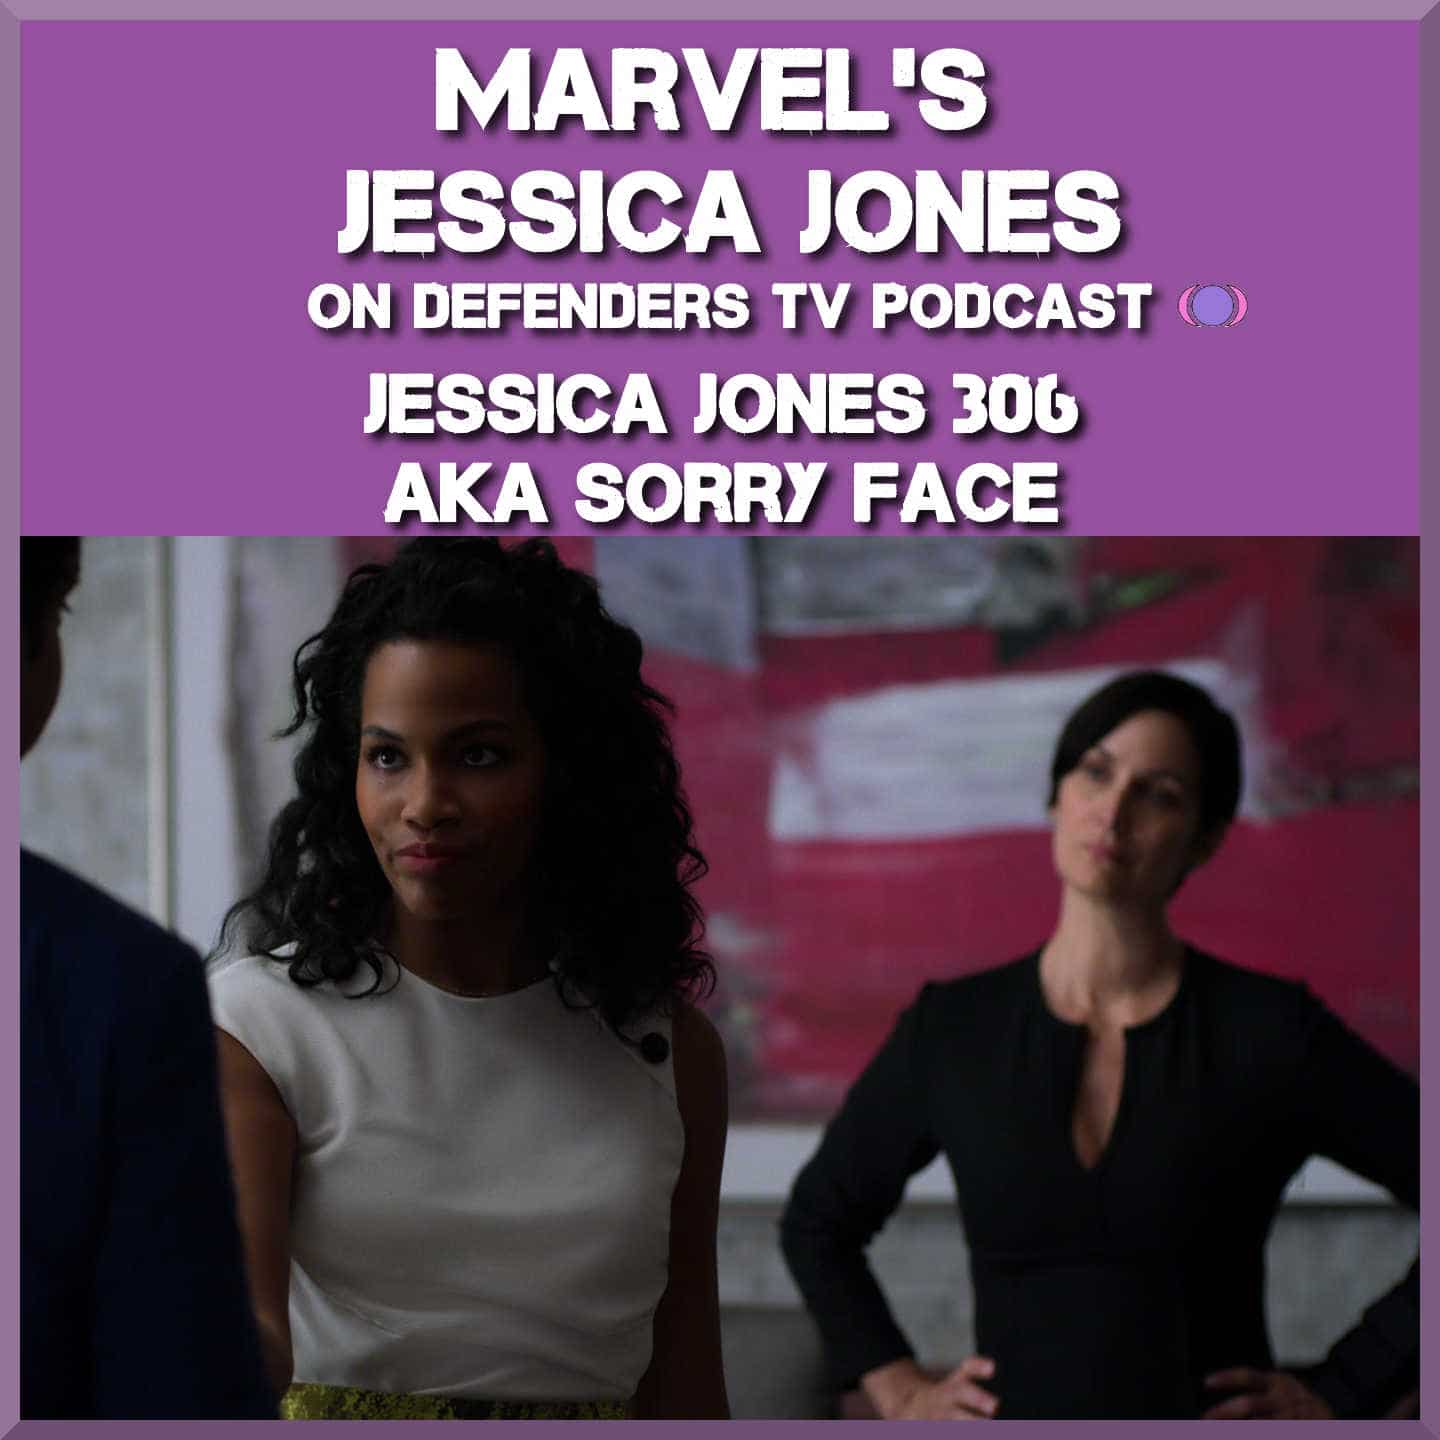 Jessica Jones 306 Review of “AKA Sorry Face” by TV Podcast Industries